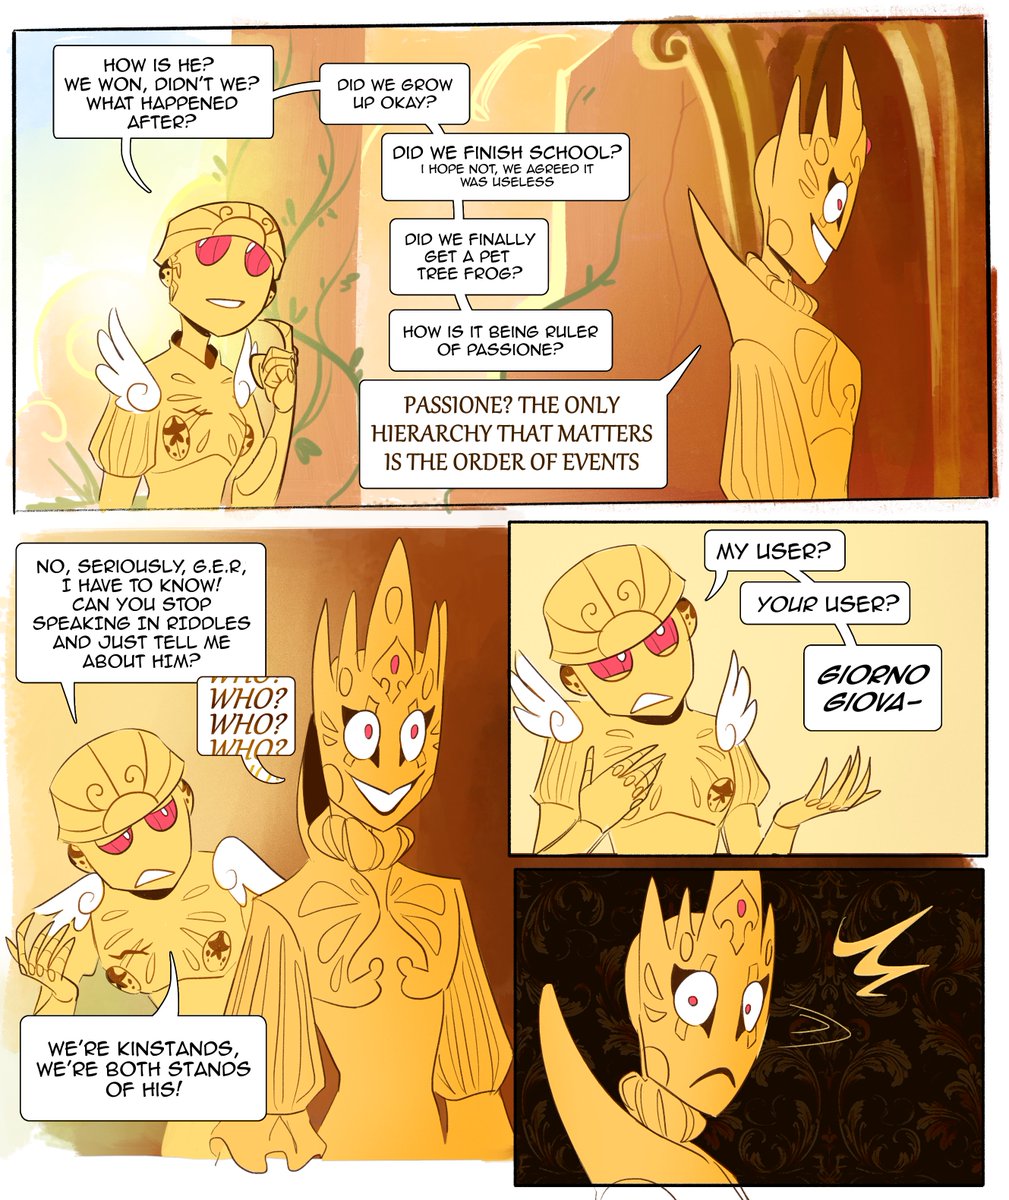 [ Standverse AU ] #standverse comic where Gold visits the Requiem Palace (formerly known as the Golden Wind temple) 1/6